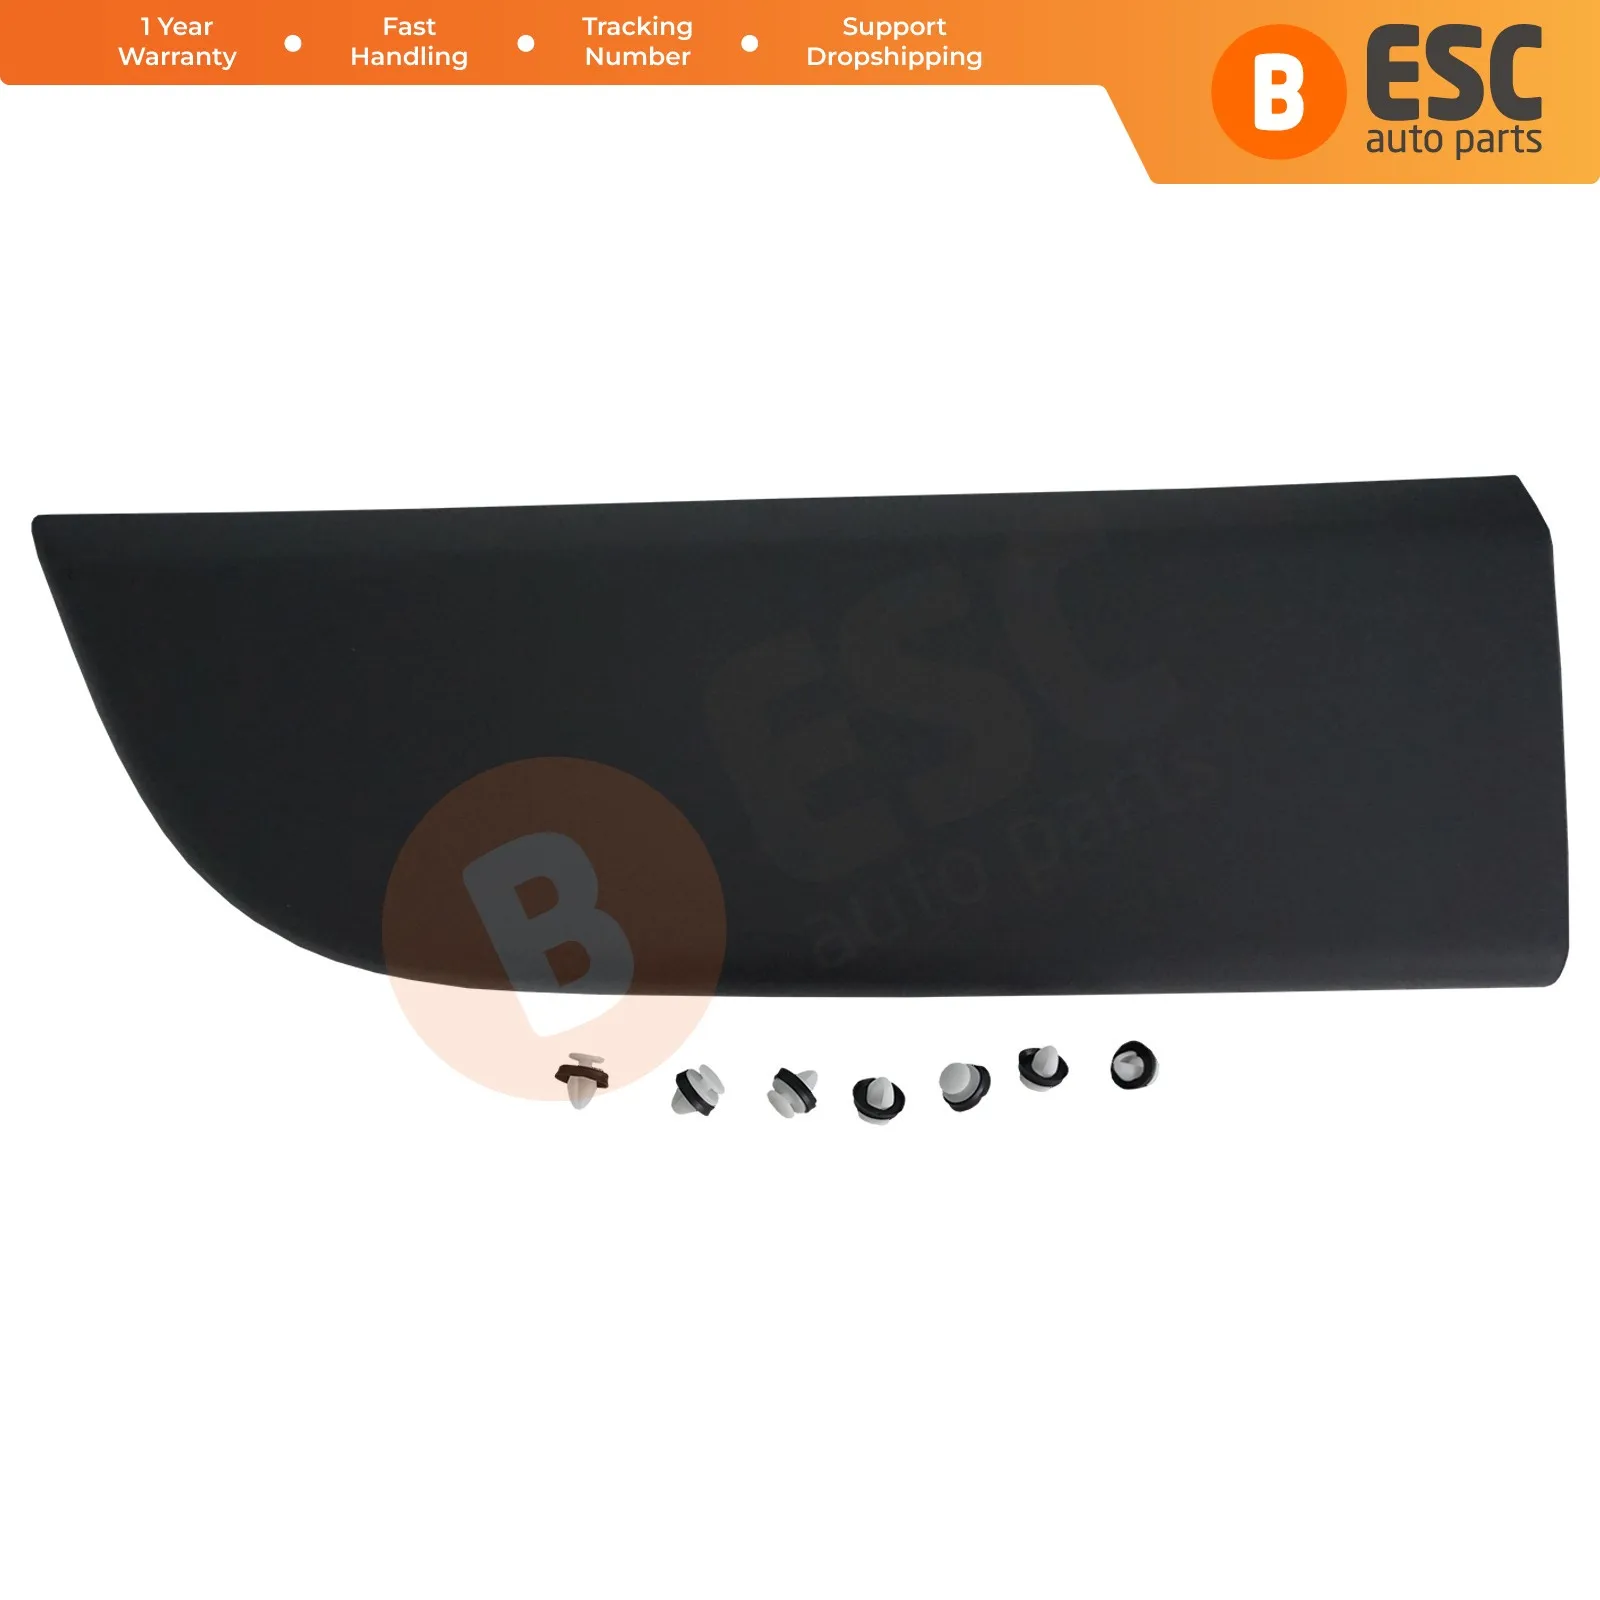 

ESC Auto Parts ESP957 Front Door Side Panel Moulding Strip LEFT 808210166R for Renault Master MK3 Movano B NV400 Made in Turkey